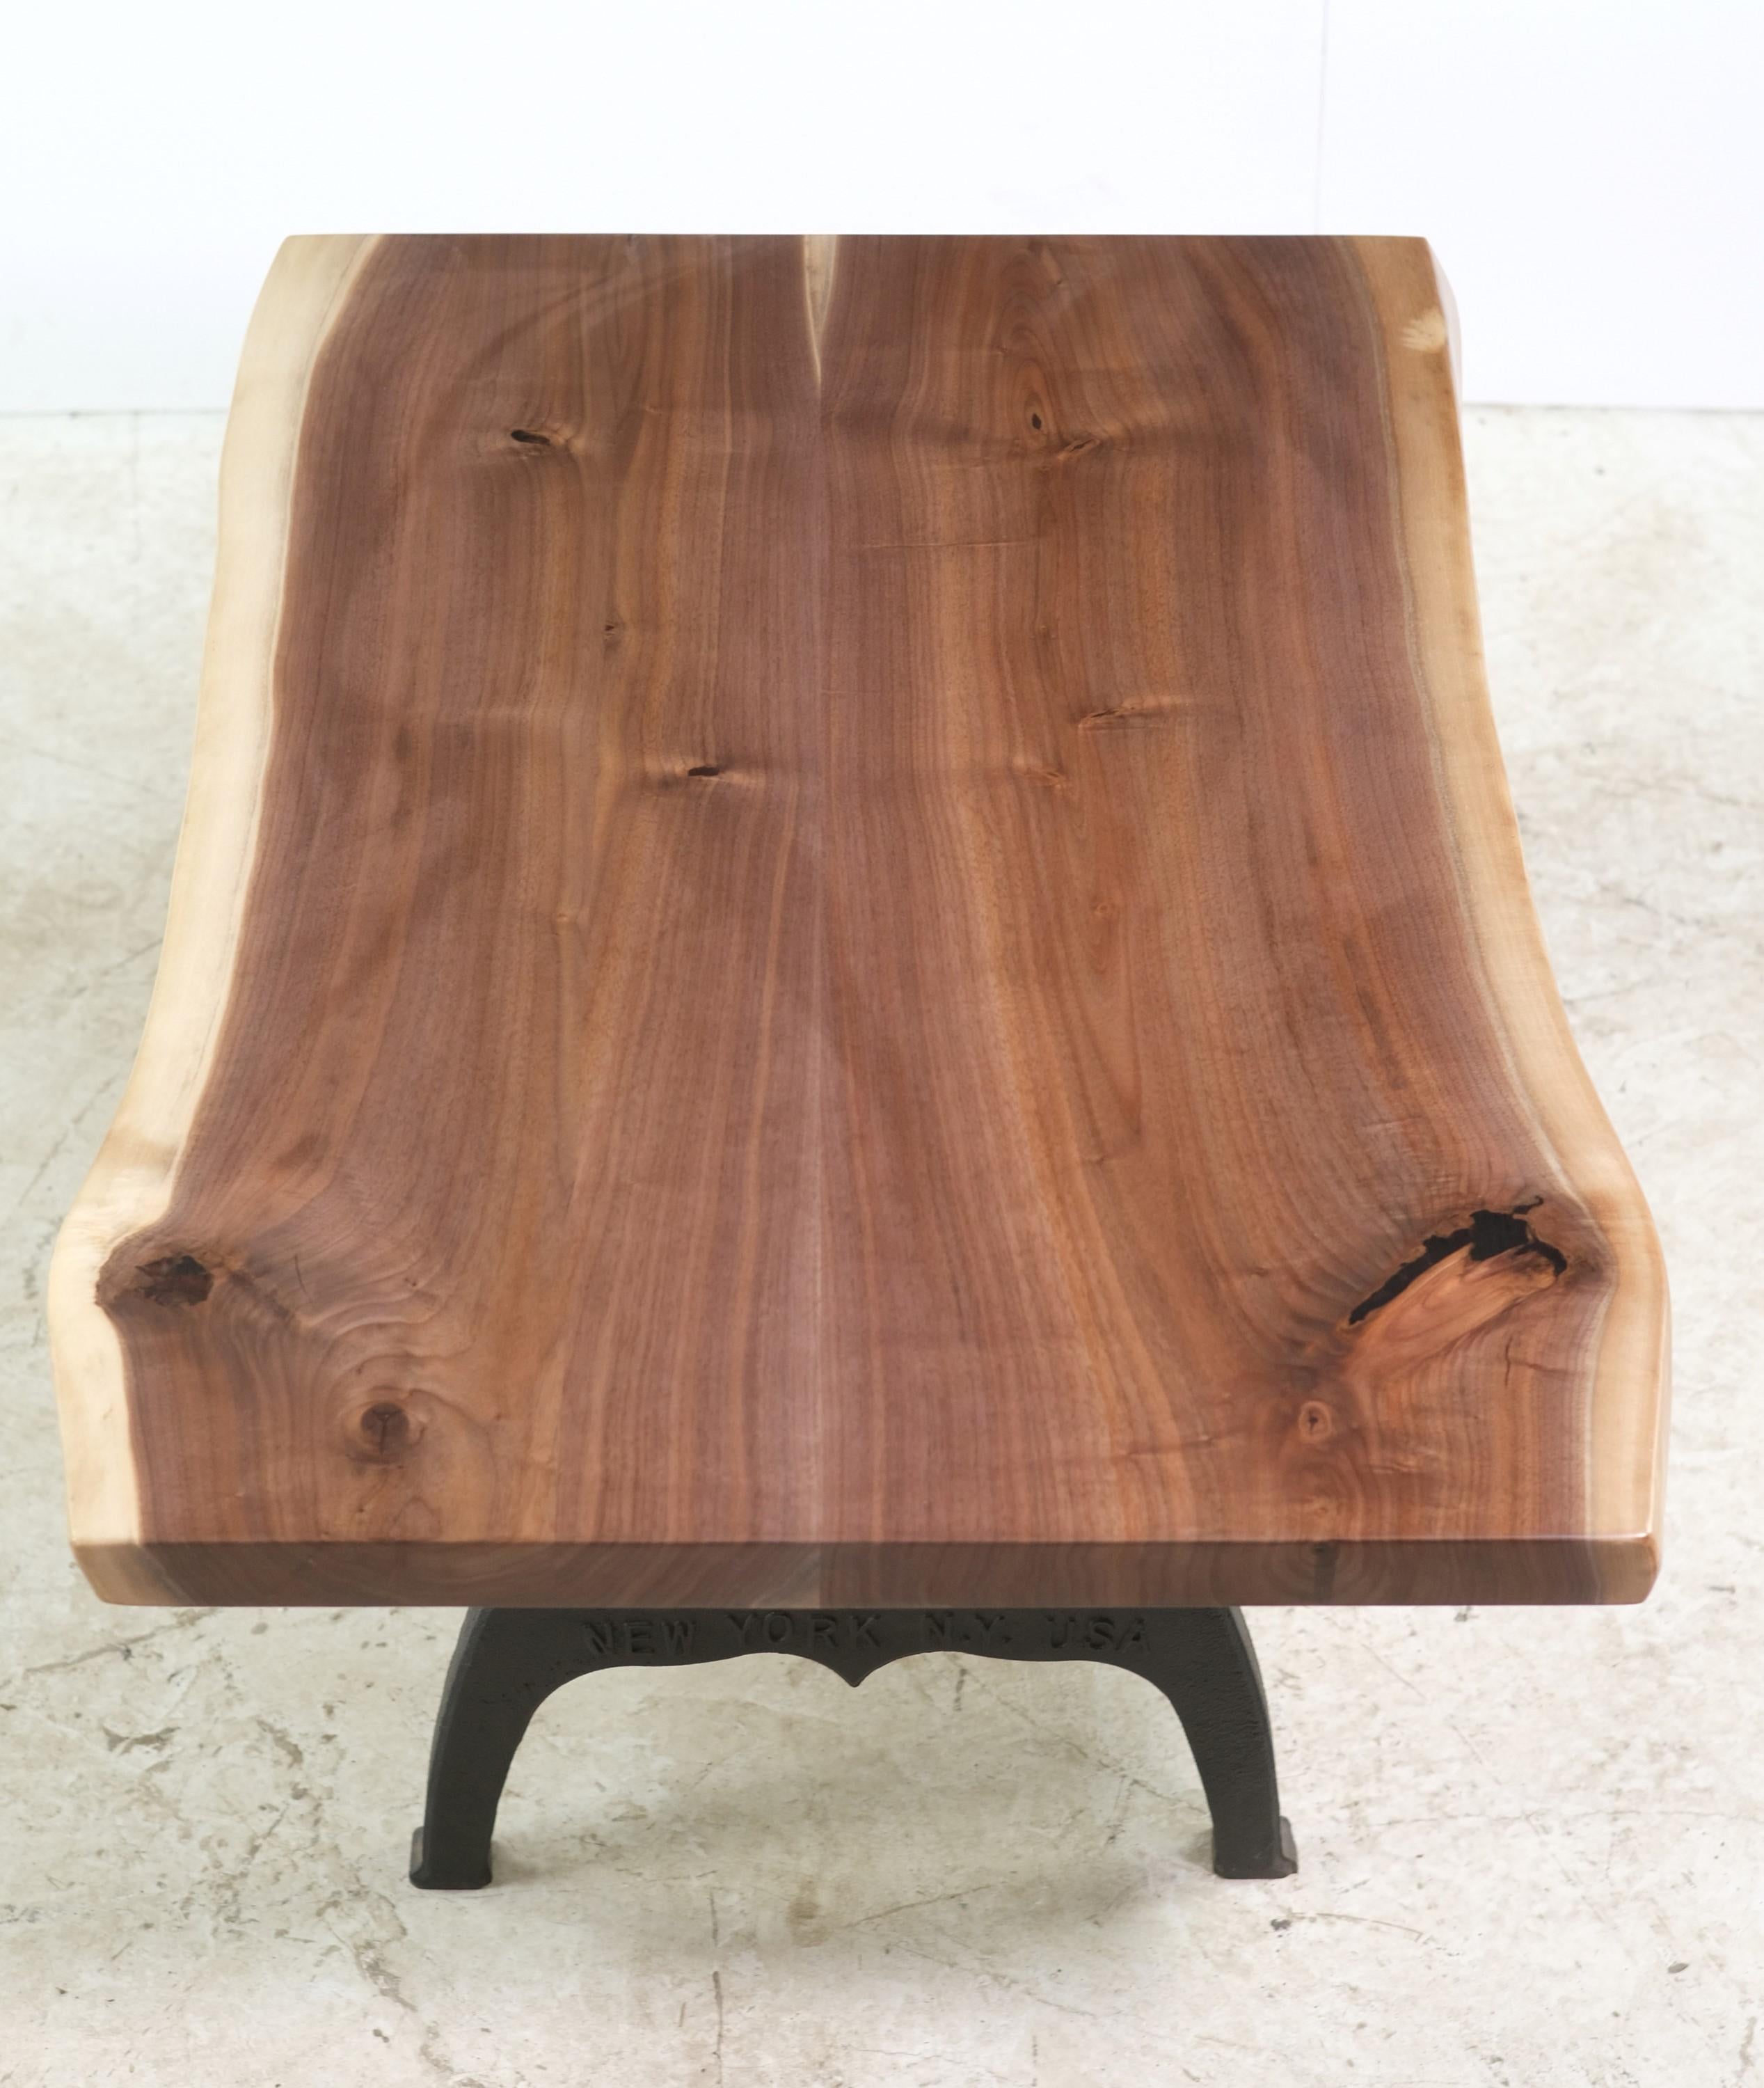 This live edge coffee table features a natural stained two slab solid walnut top paired with Industrial style cast iron New York legs. This table is ready to ship. Please note, this item is located in our Scranton, PA location.